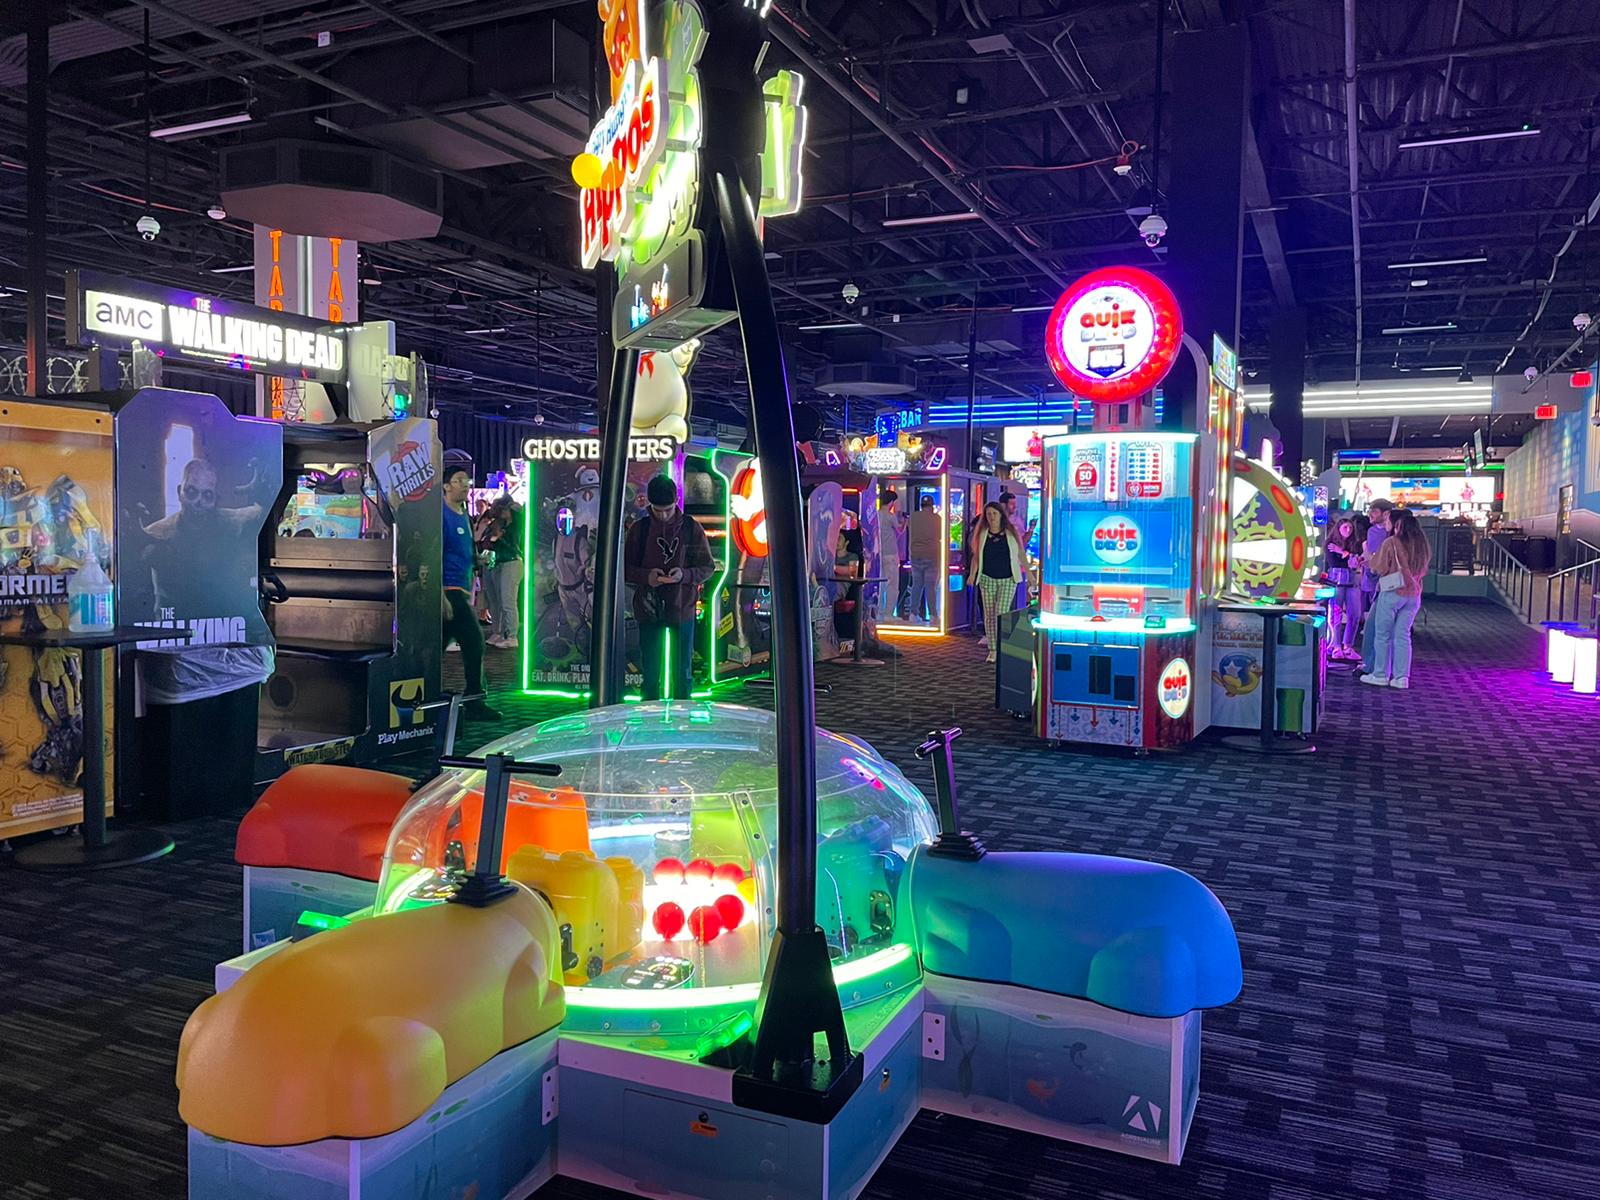 Take a look inside Dave and Buster's